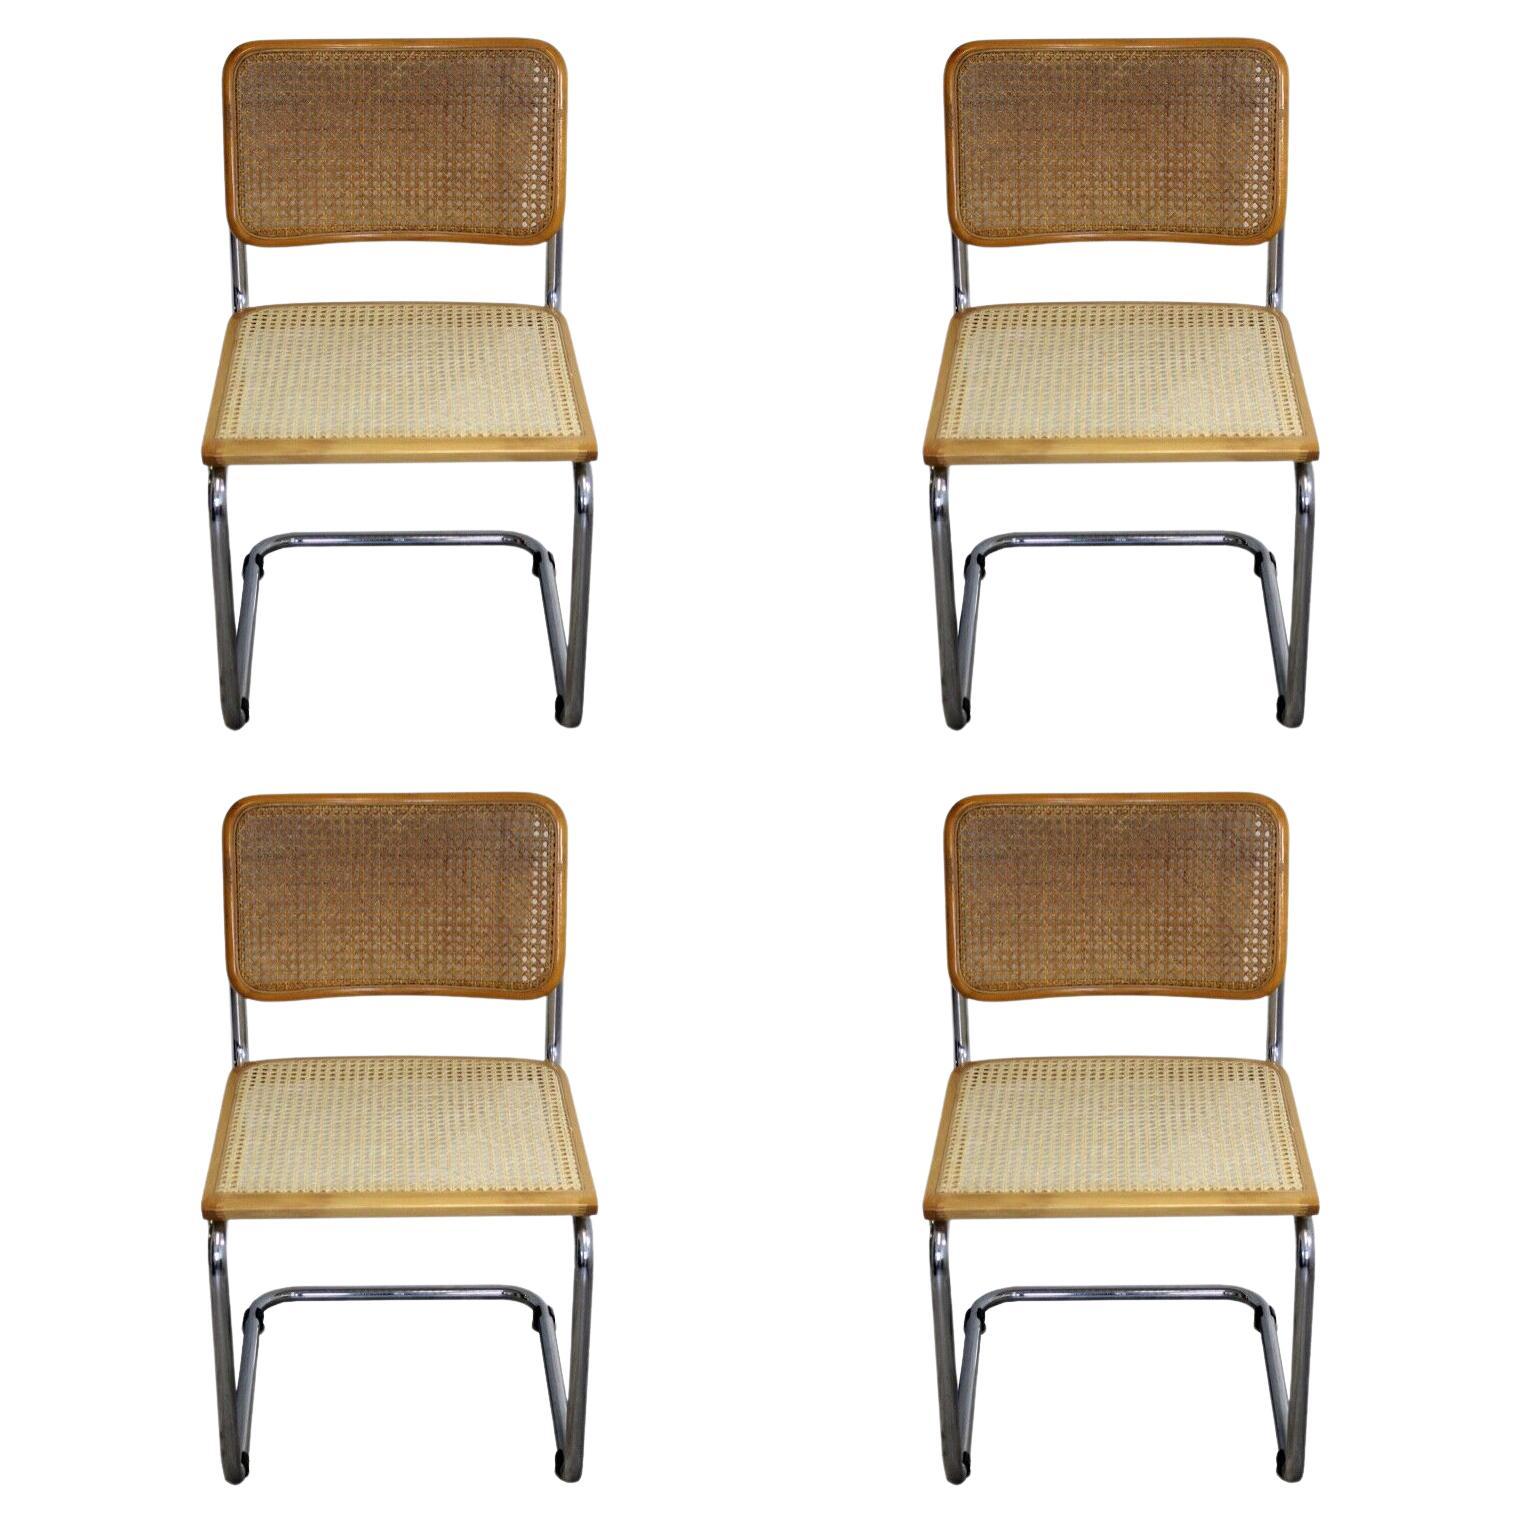 Mid-Century Modern Set of 4 Marcel Breuer Cesca Cane and Chrome Chairs